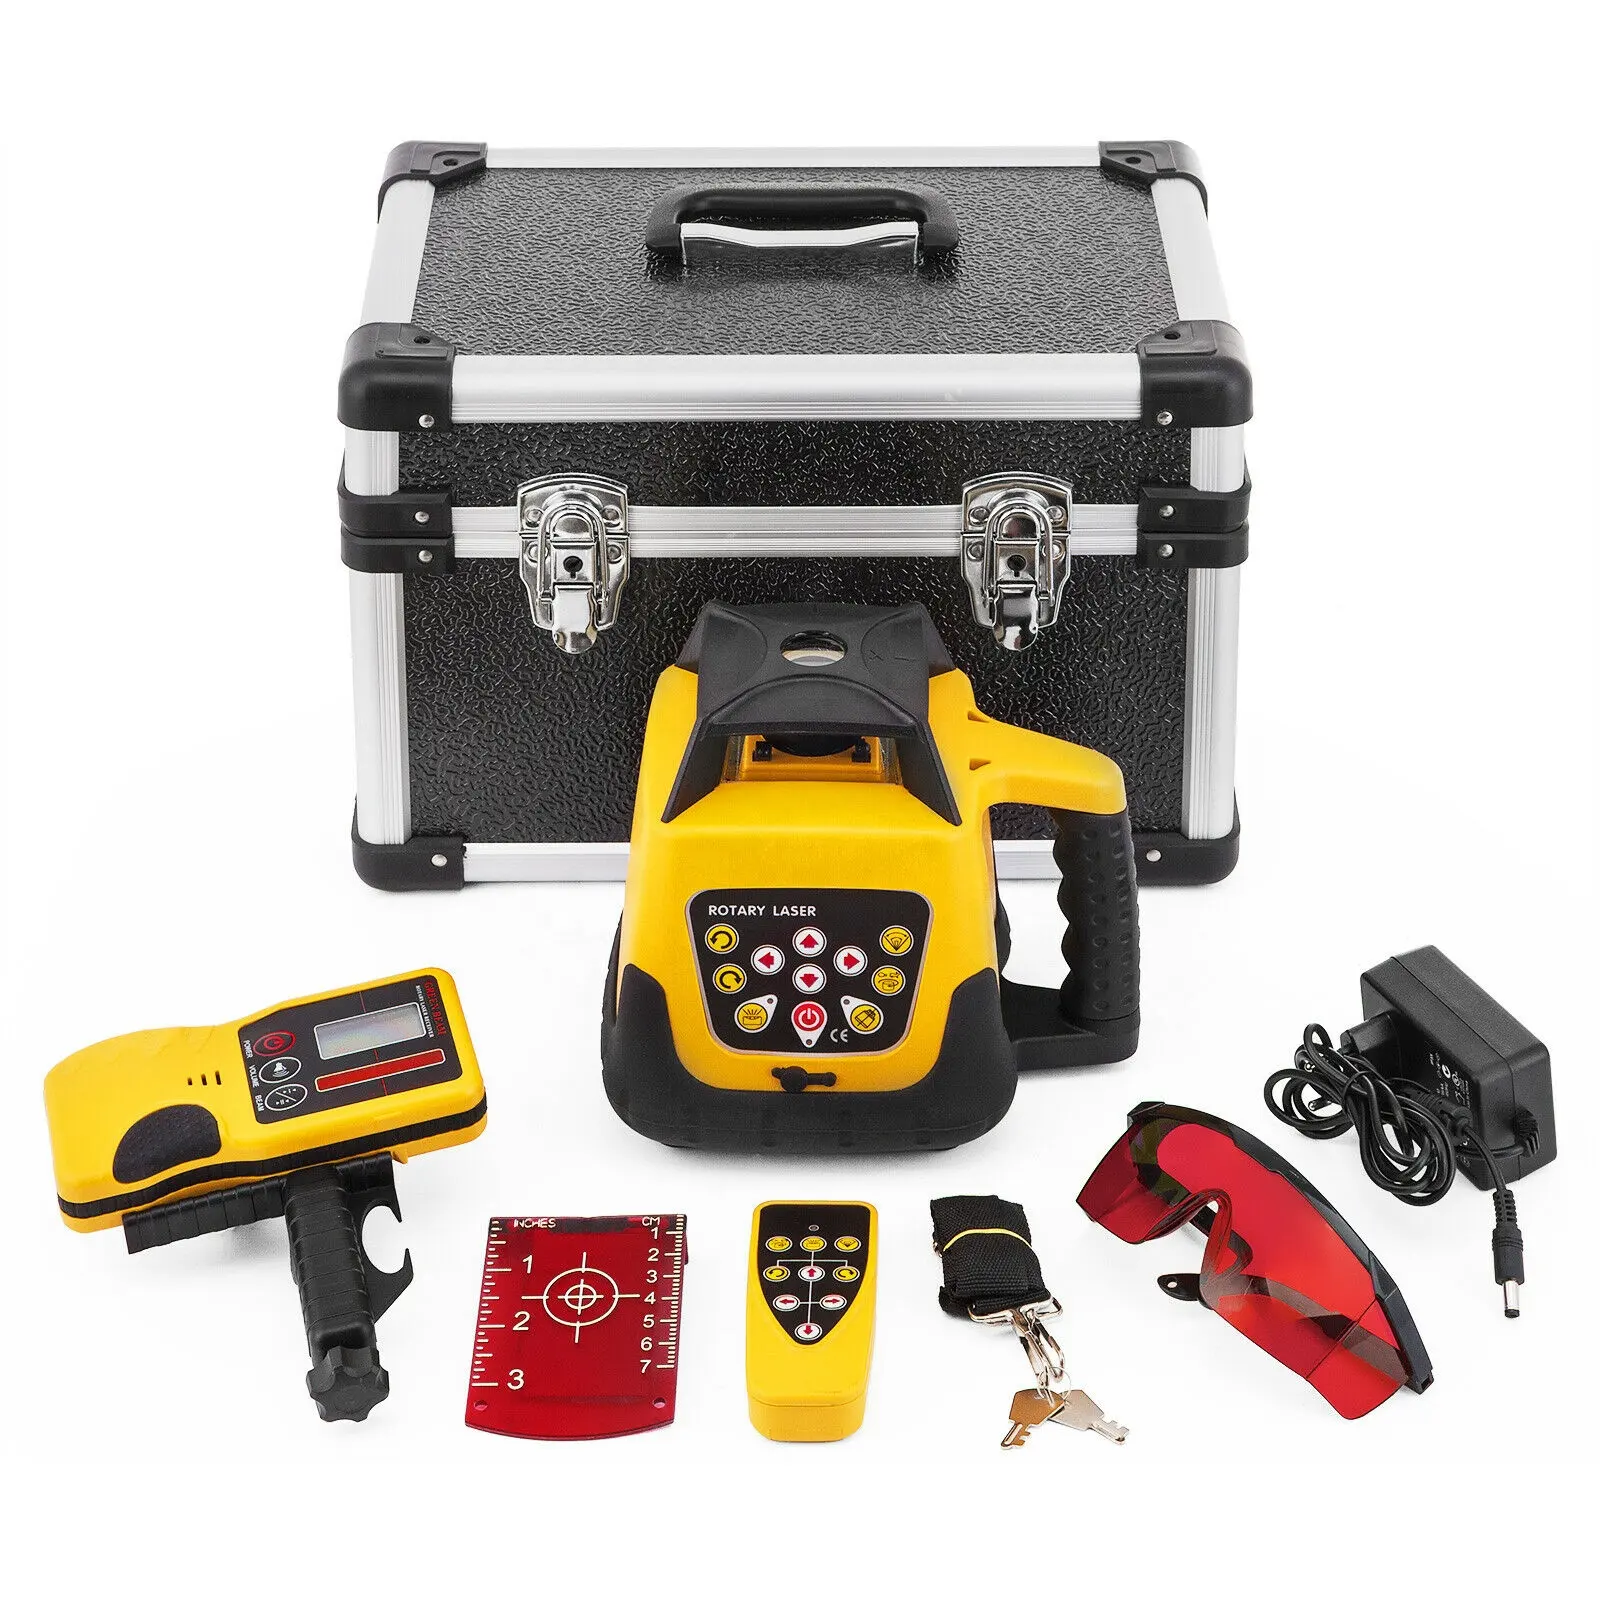 Laser Construction Level Tools 500m Automatic Rotary Rotating Laser Level Self-Leveling Tool